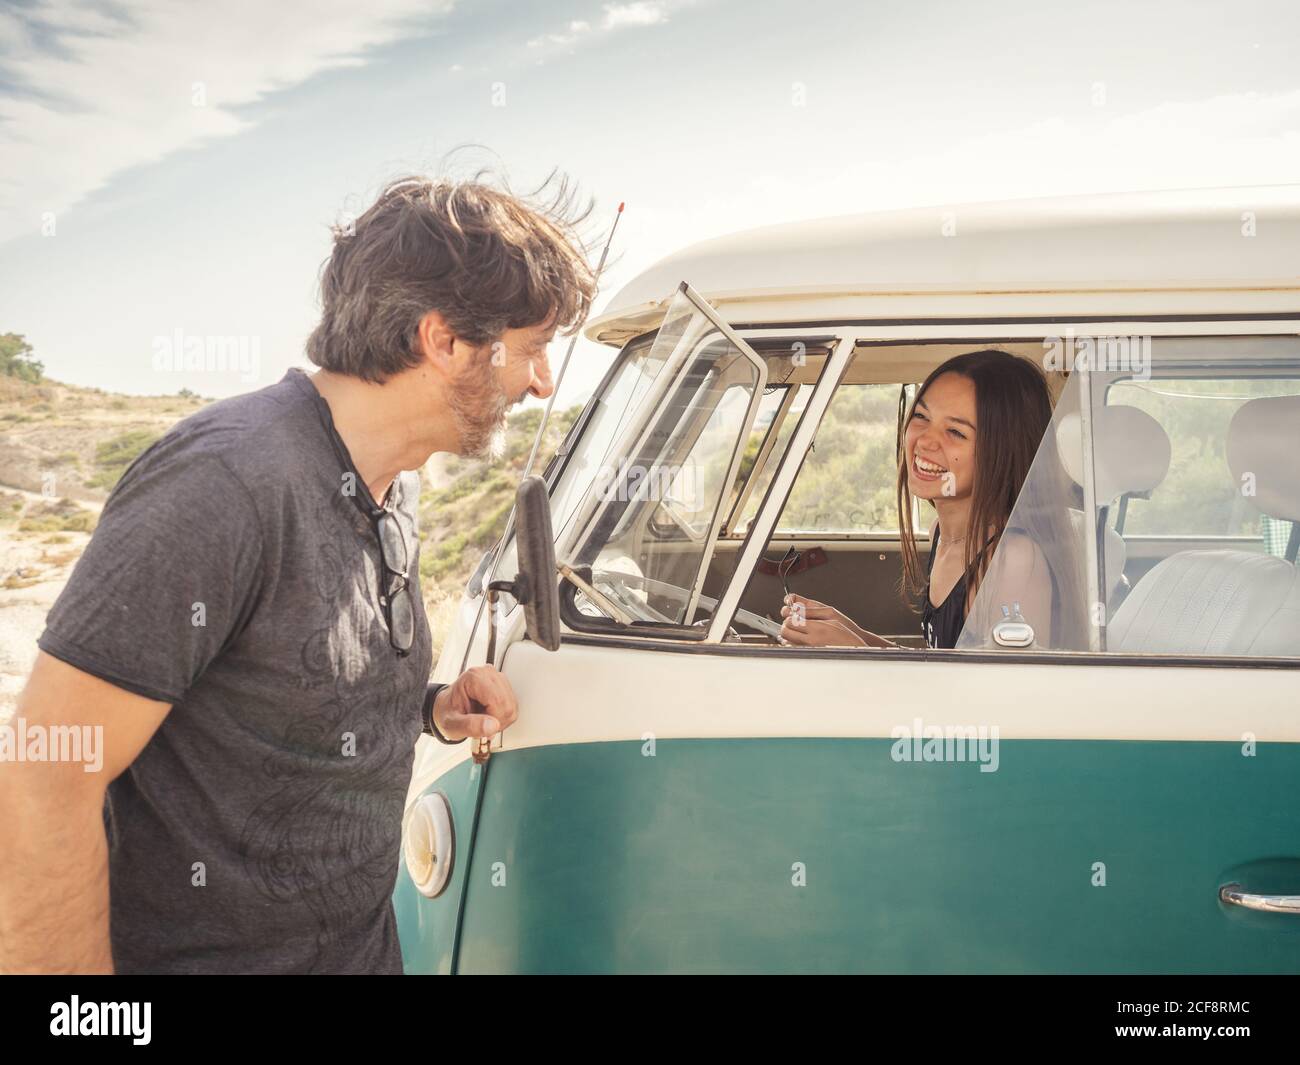 Side view of kind smiling man talking to pretty Woman laughing in front seat of car in desert place Stock Photo